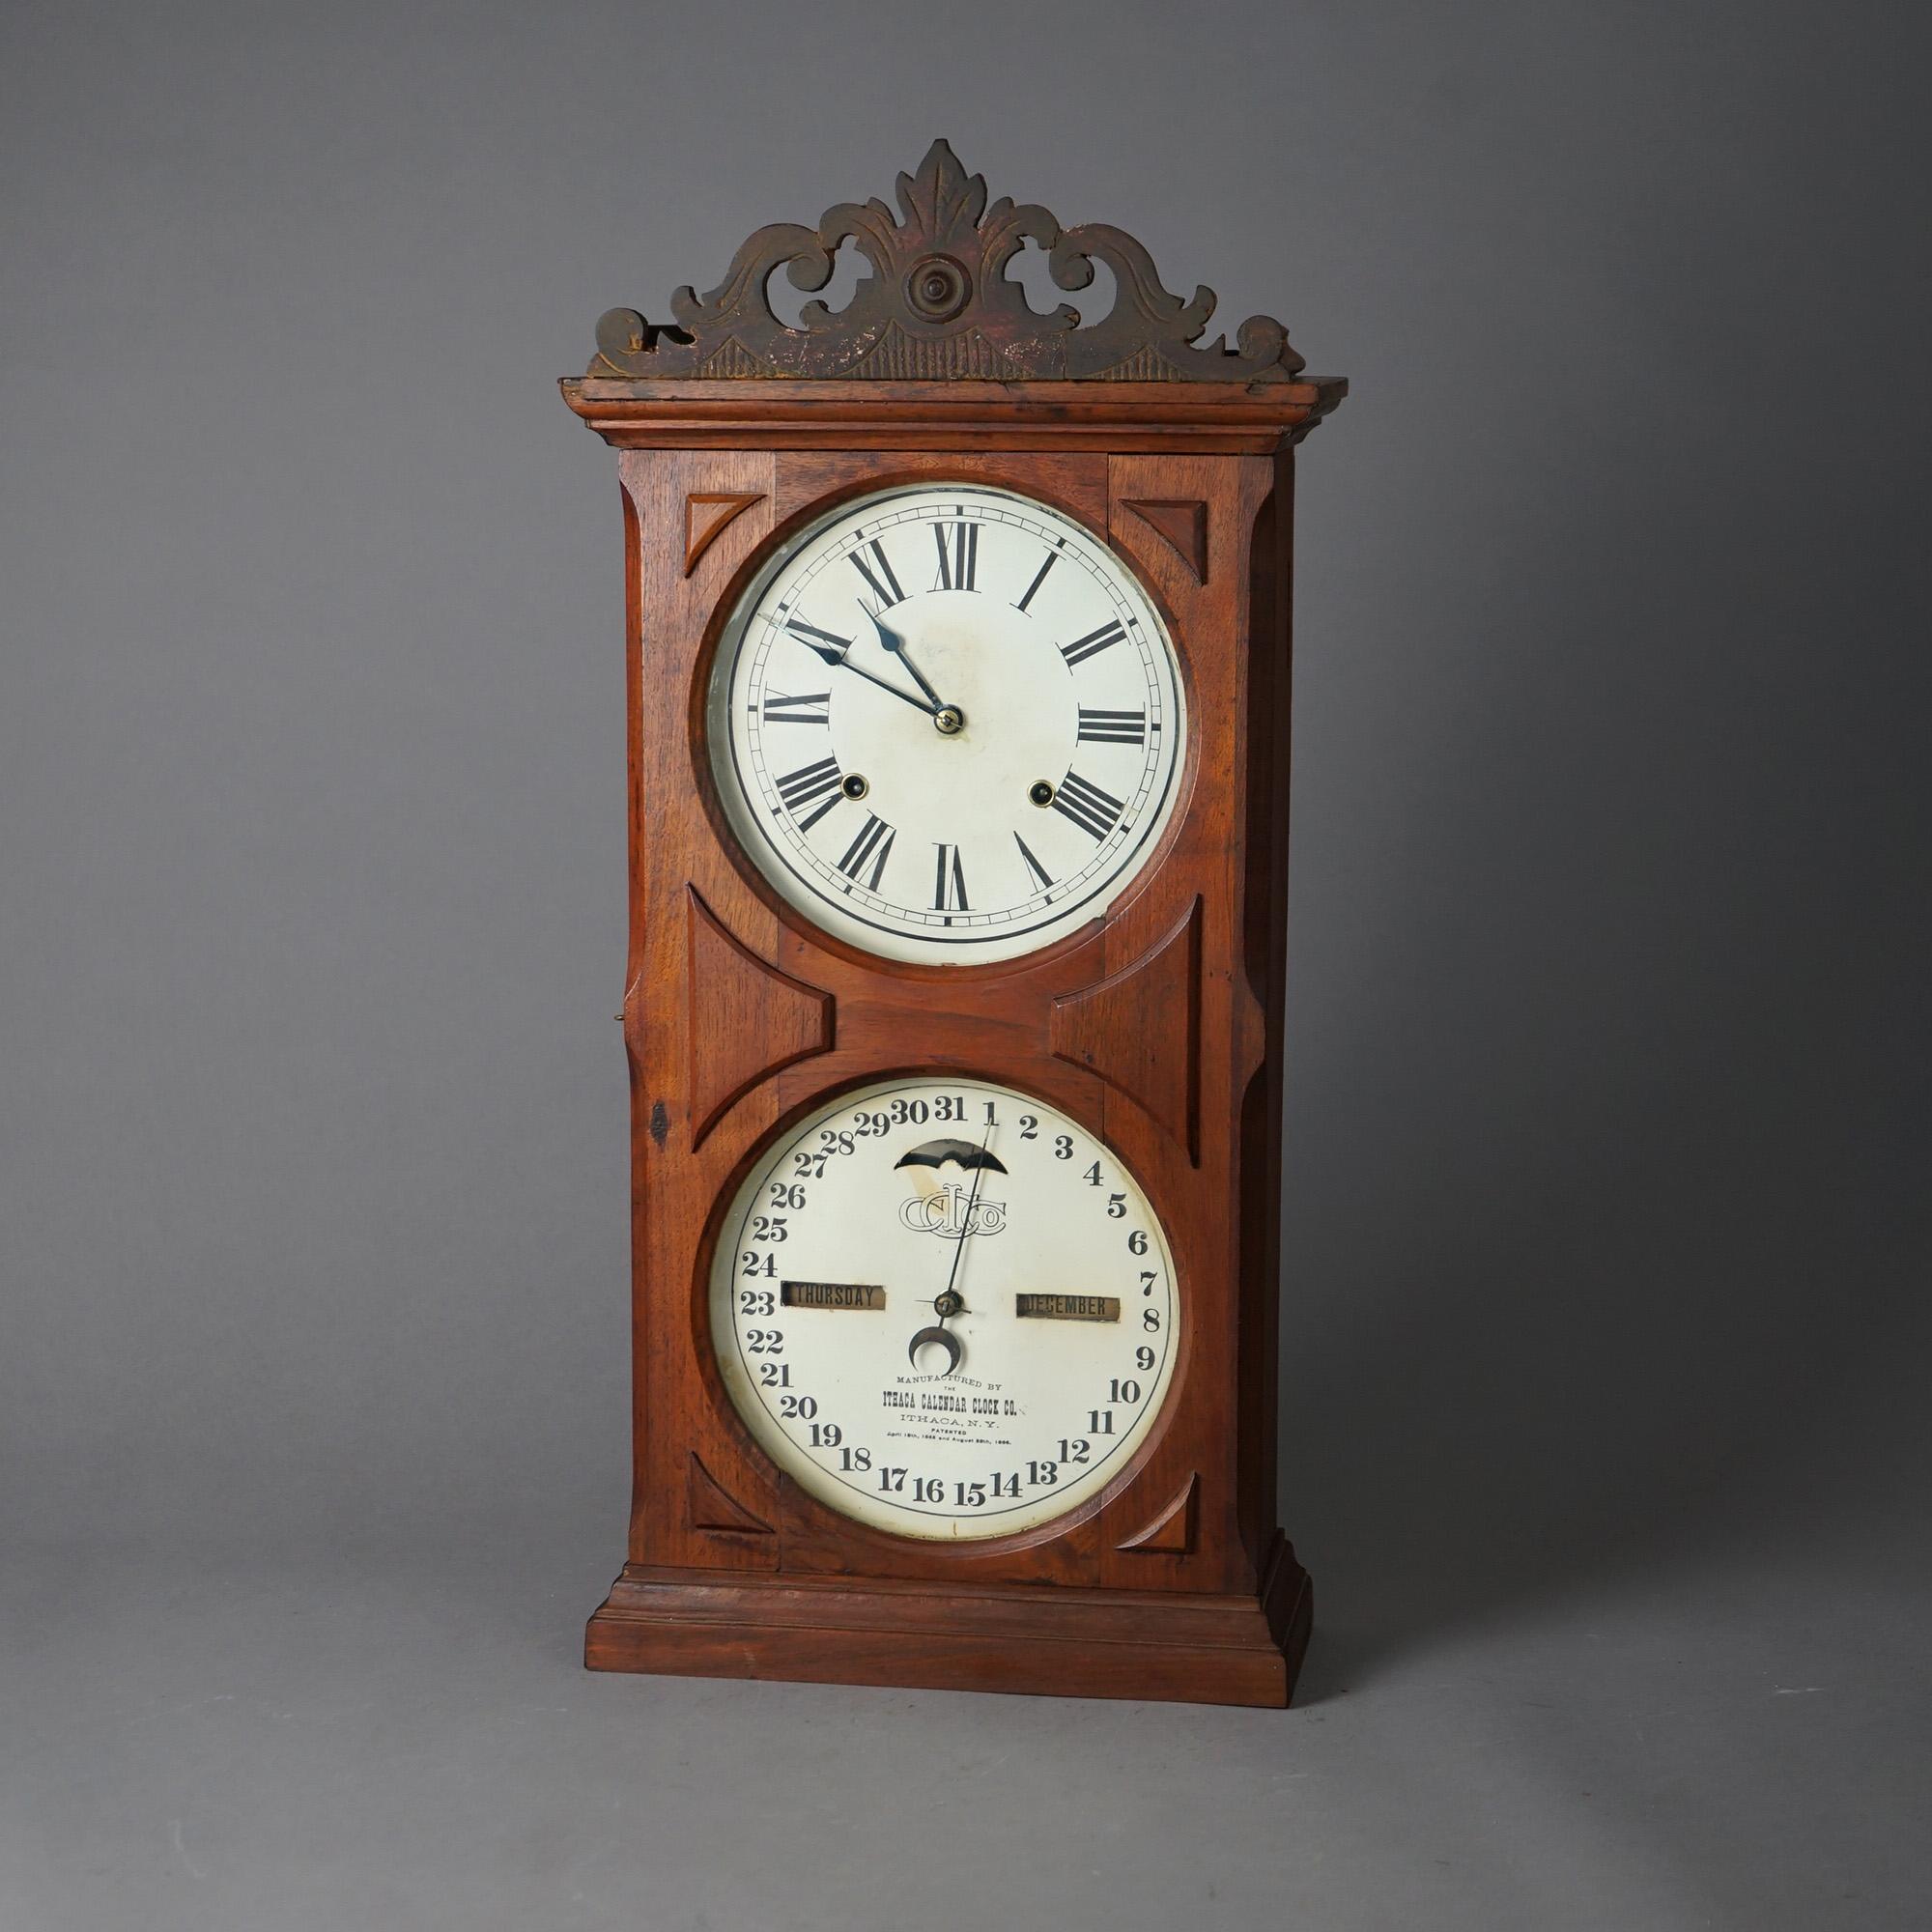 An antique mantel calendar clock by Ithaca offers walnut case with double dials including upper time dial and lower date dial, c1866

Measures - 26